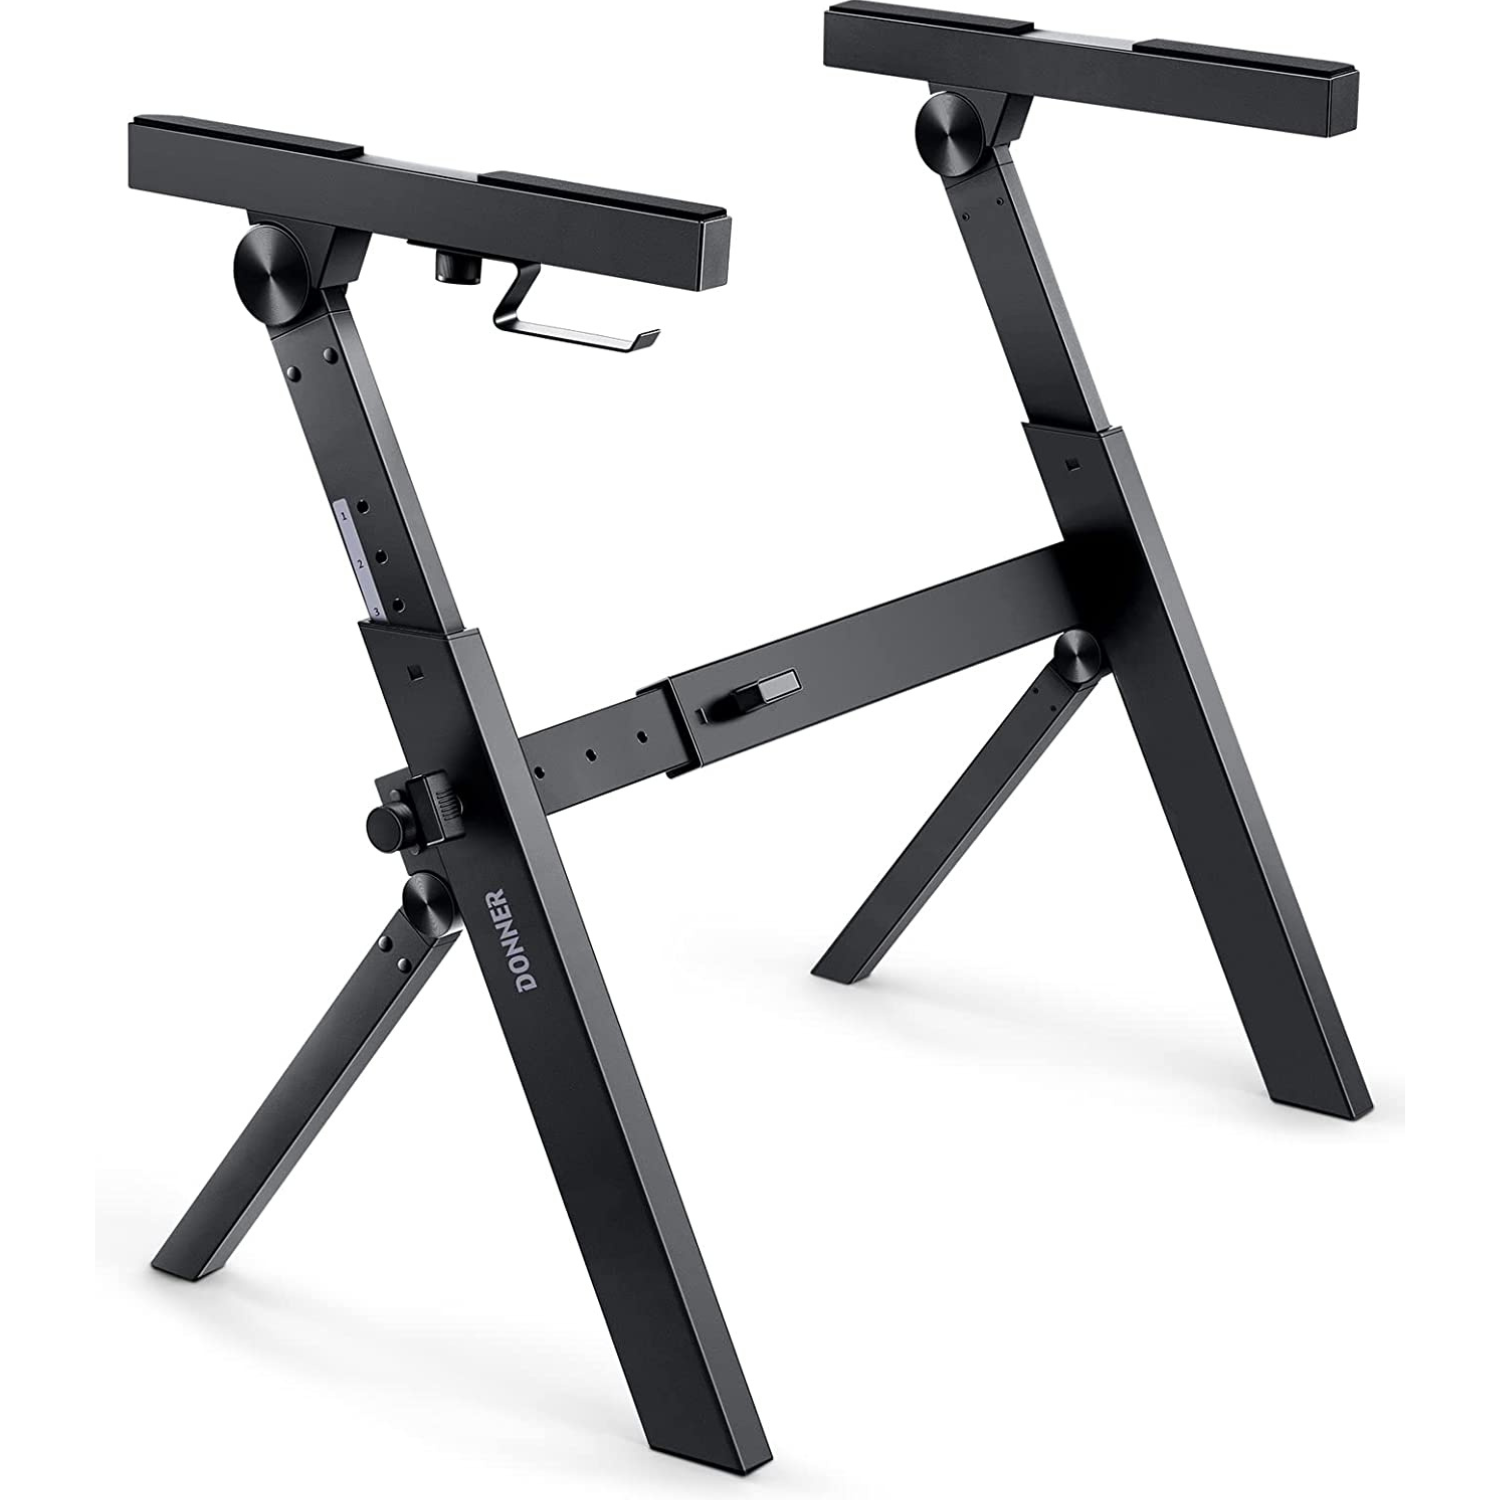 

Donner DKS-100 Z-Shaped Keyboard Stand Foldable and Metallic